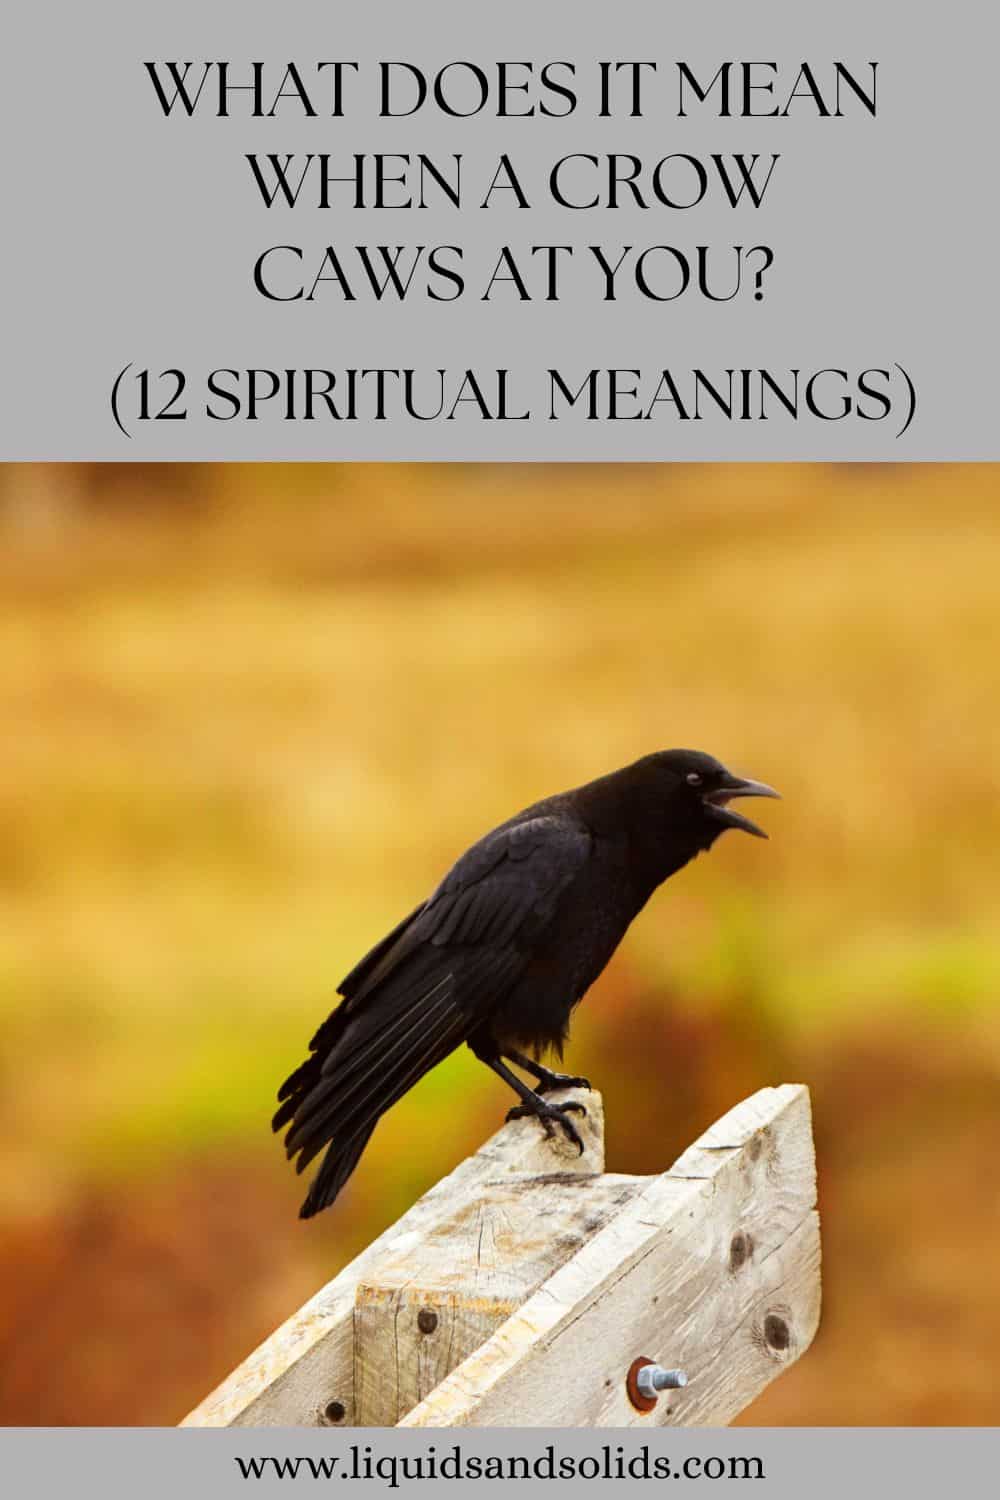 What Does It Mean When A Crow Caws at You? (12 Spiritual Meanings)